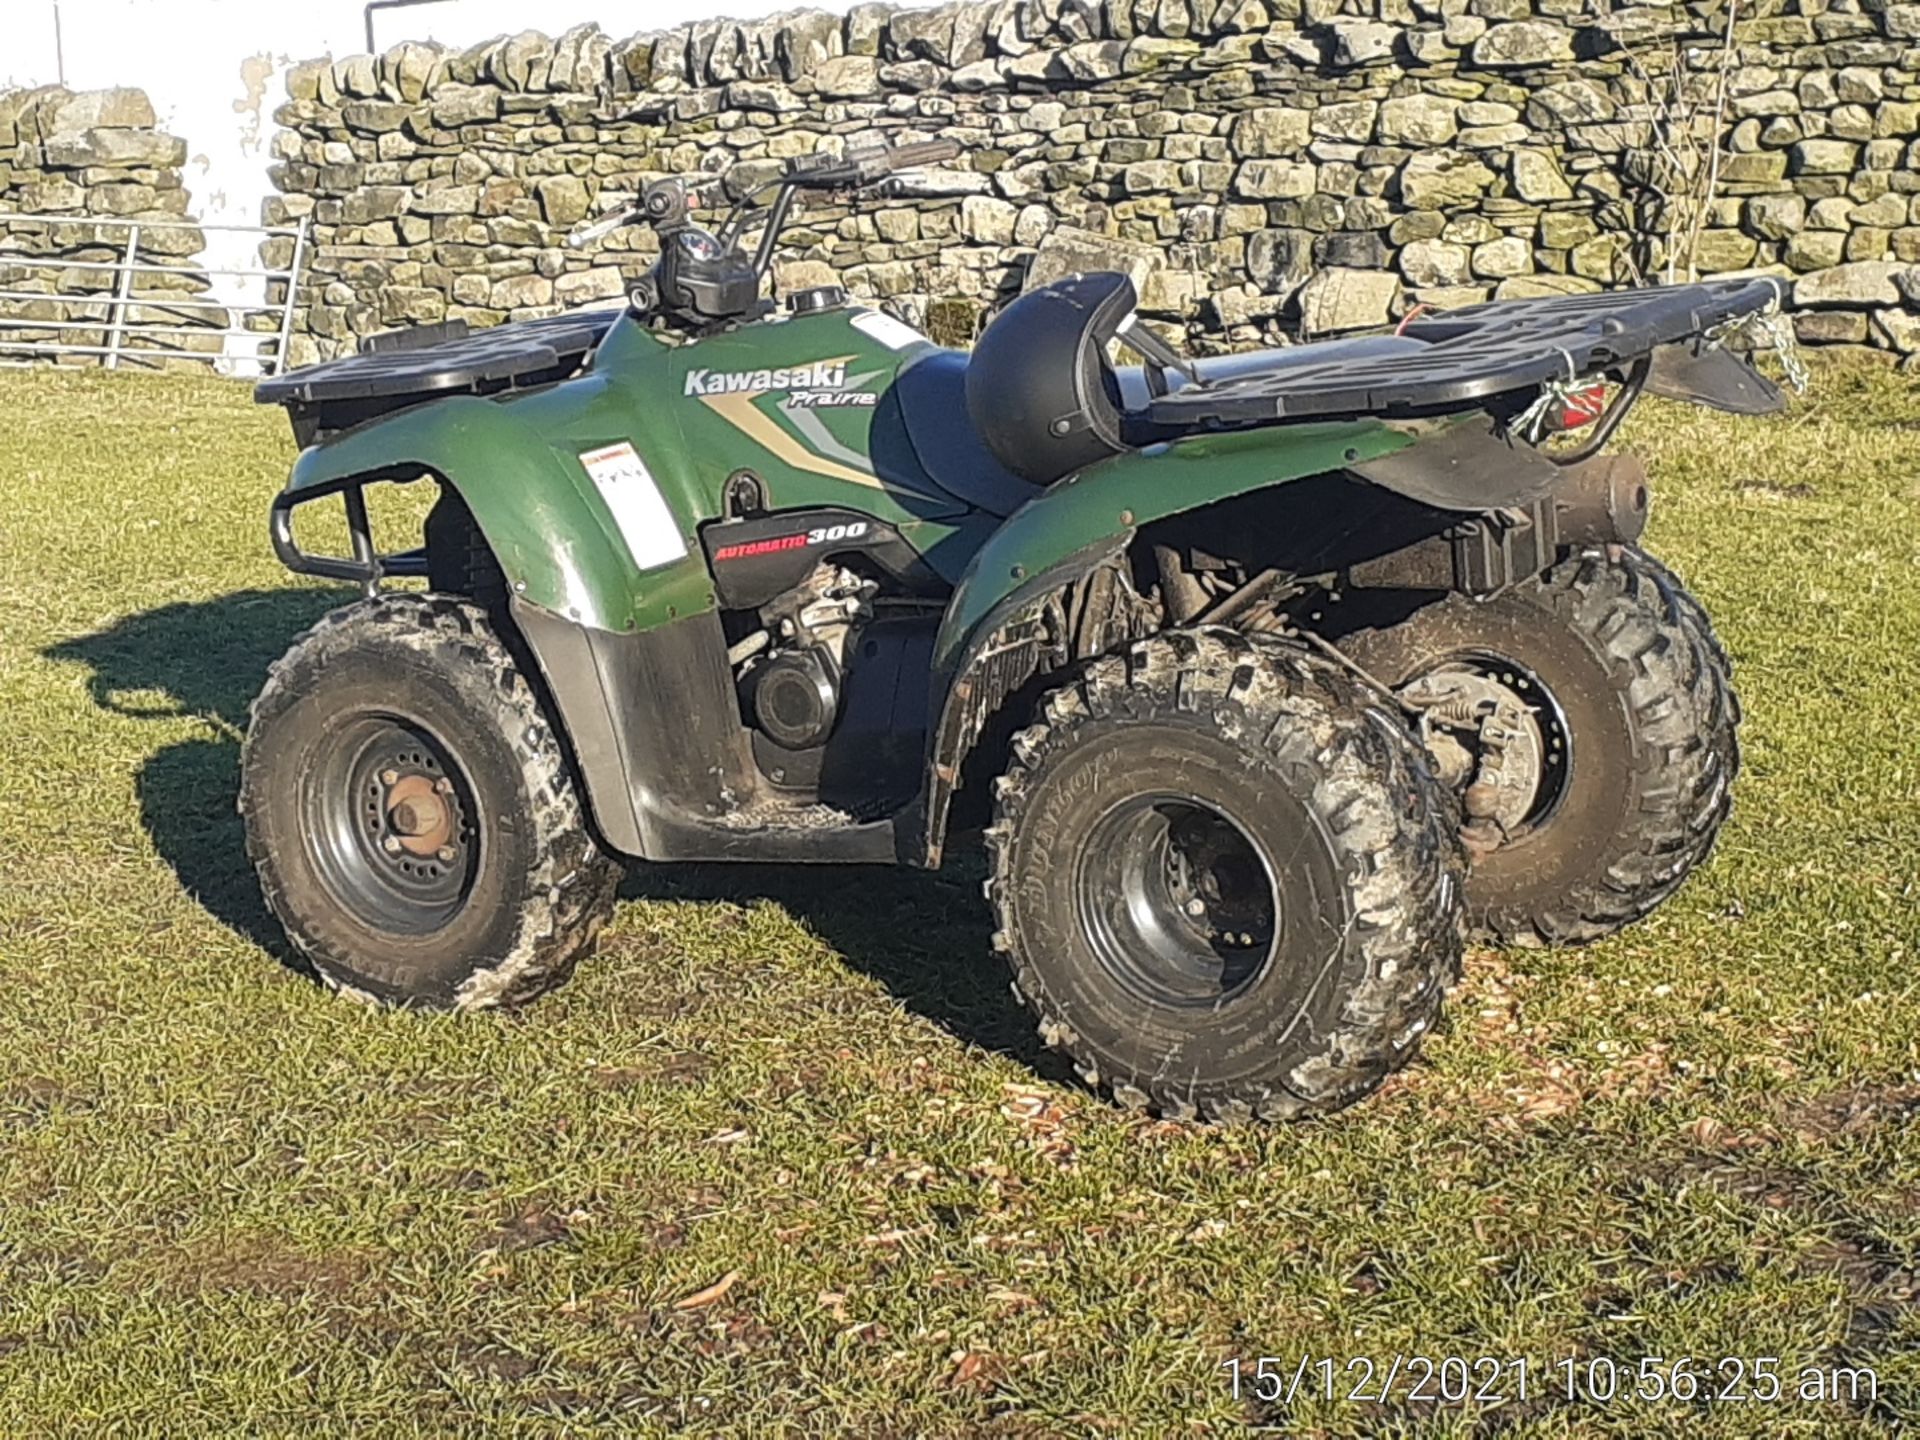 KAWASAKI PRAIRIE 300 4x4 QUAD BIKE, TOW BALL HITCH, FULL TIME 4WD, 1 OWNER FROM NEW *NO VAT* - Image 3 of 7